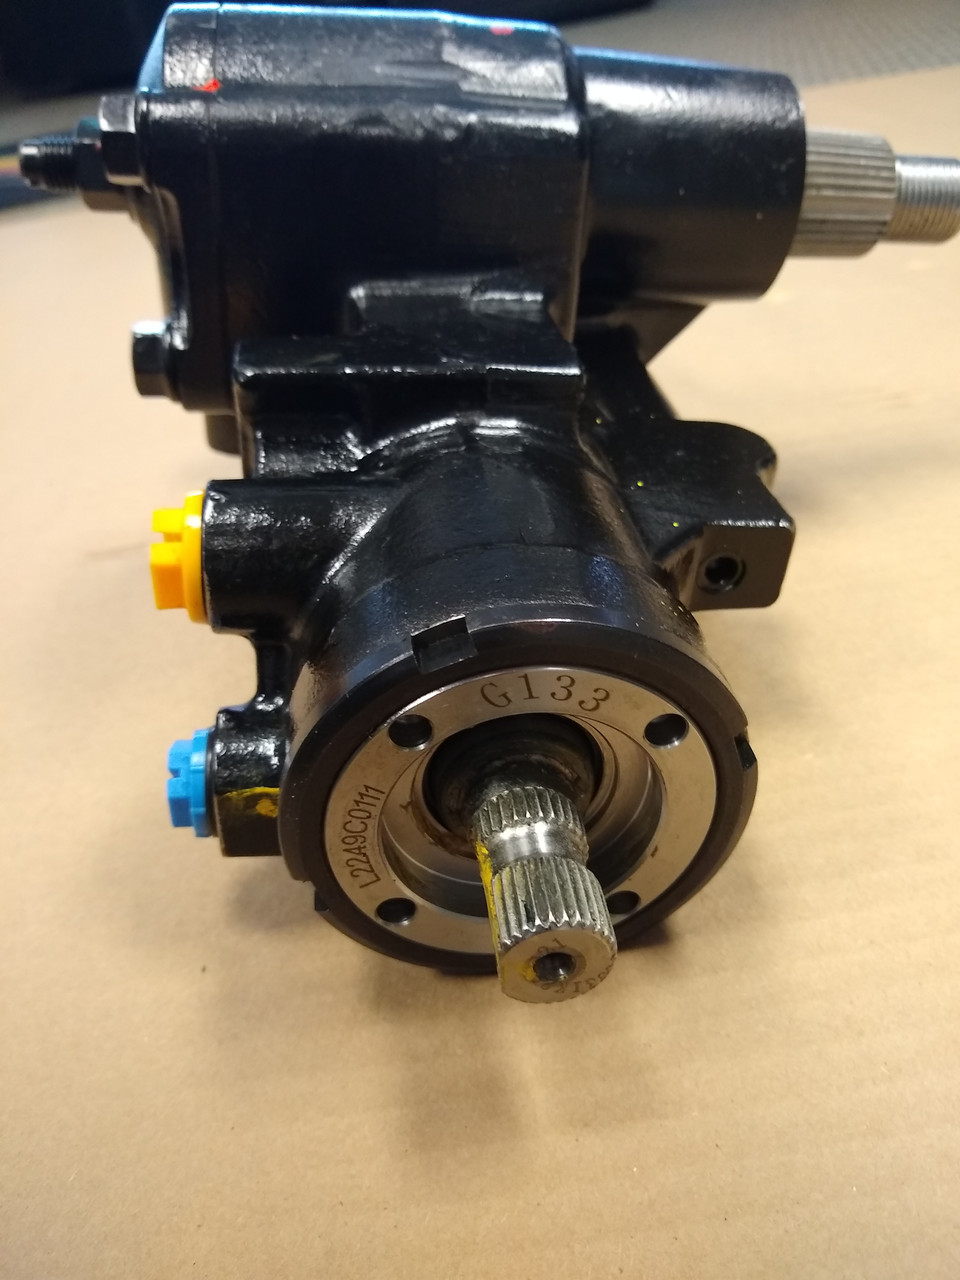 Brand-new steering gear box with coupler for quick ratio power steering 1984-1987 Buick Grand National vehicles available at Highway Stars